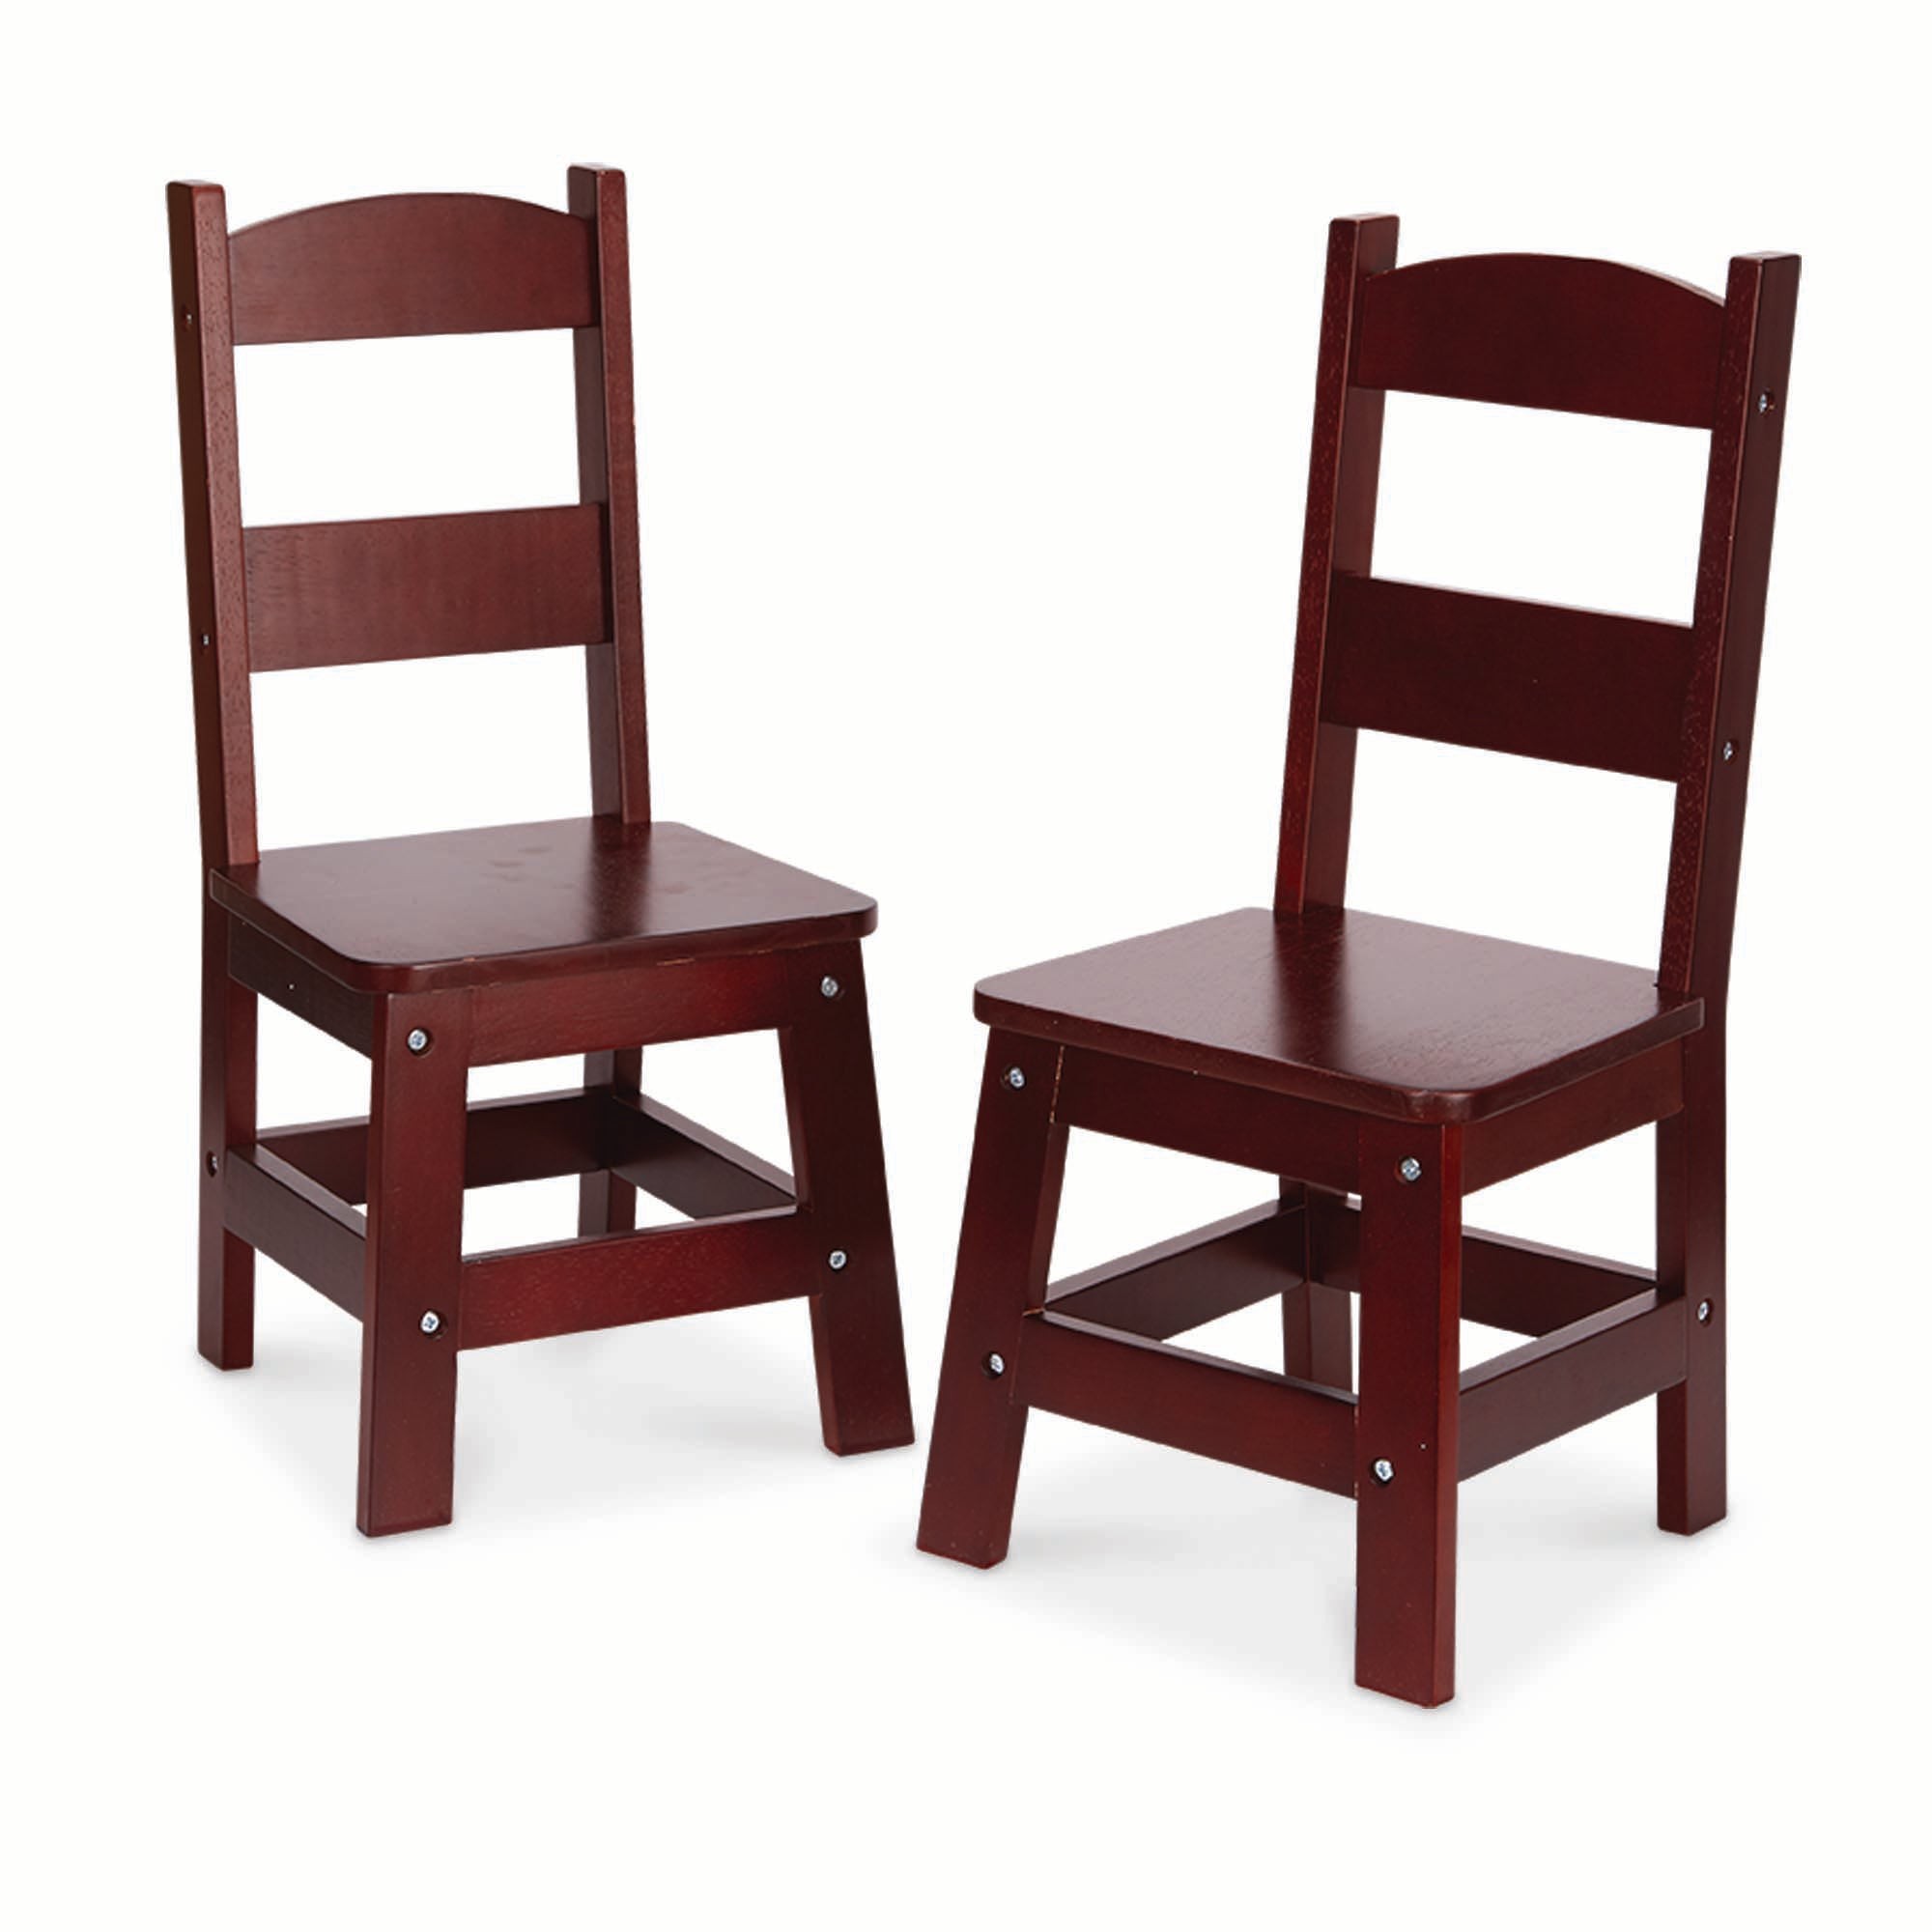 Wooden Chair Pair Espresso - Ages 3-8 Years